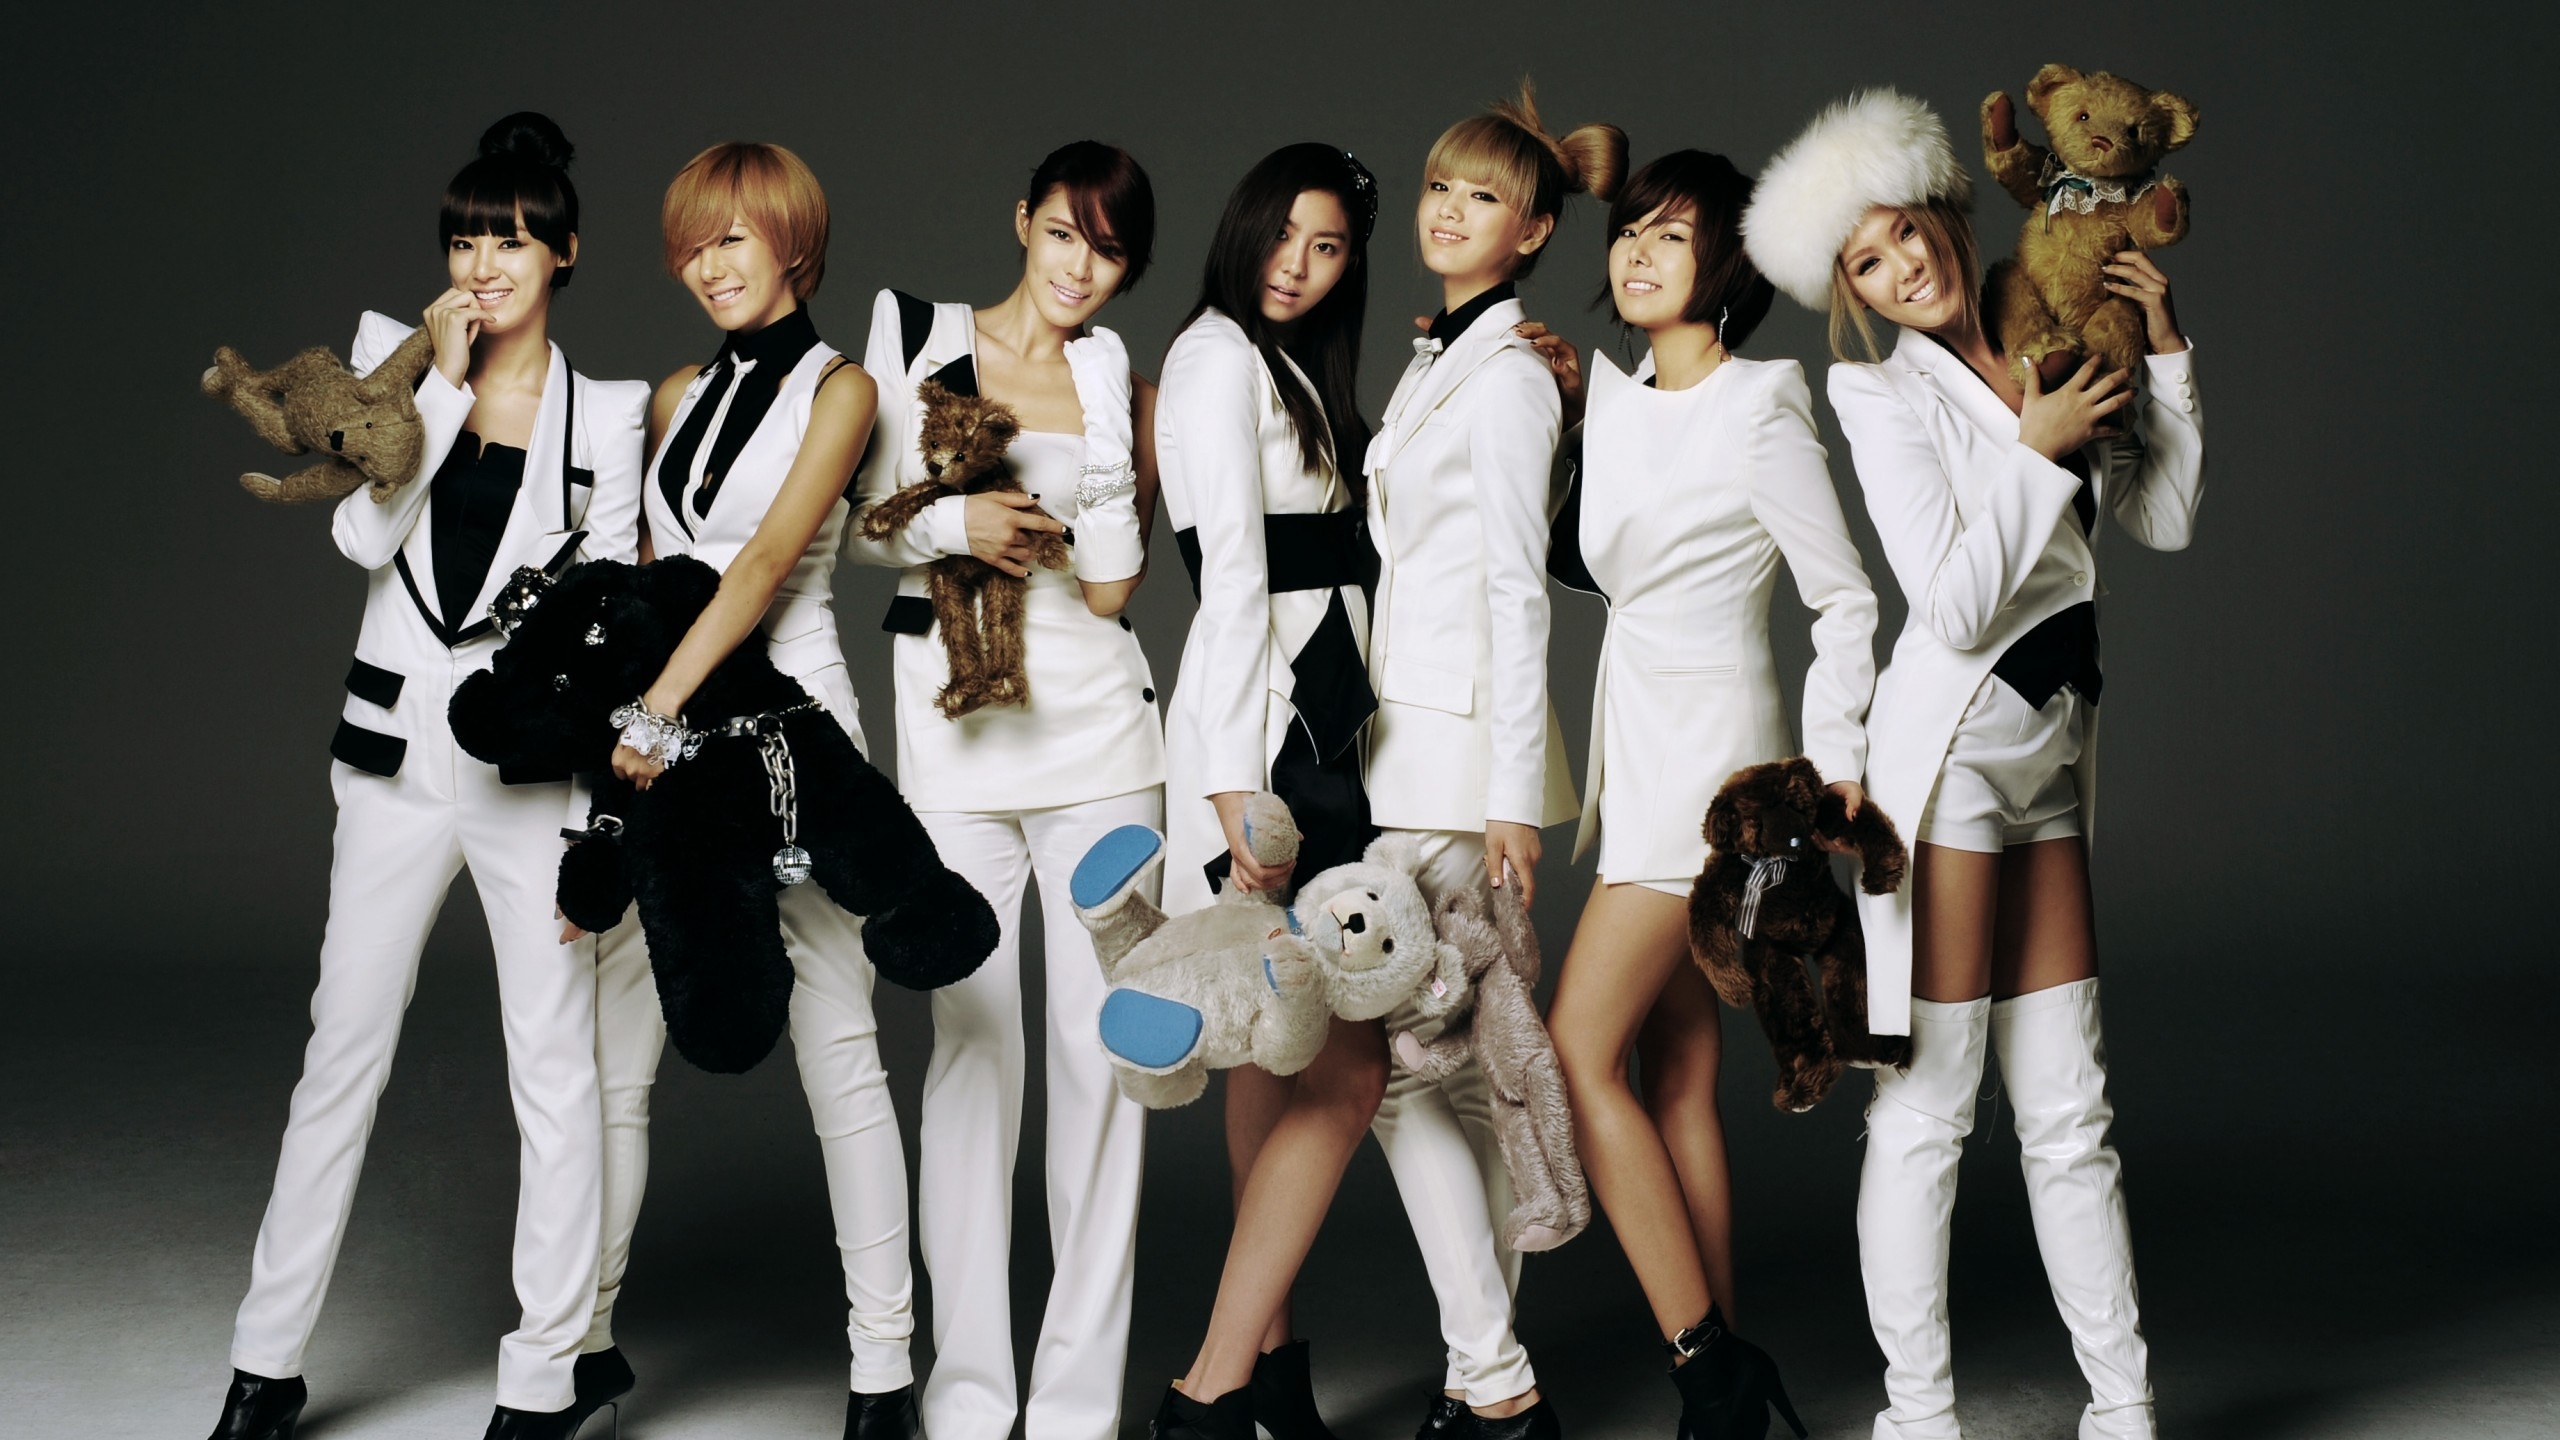 After School Band for 2560x1440 HDTV resolution